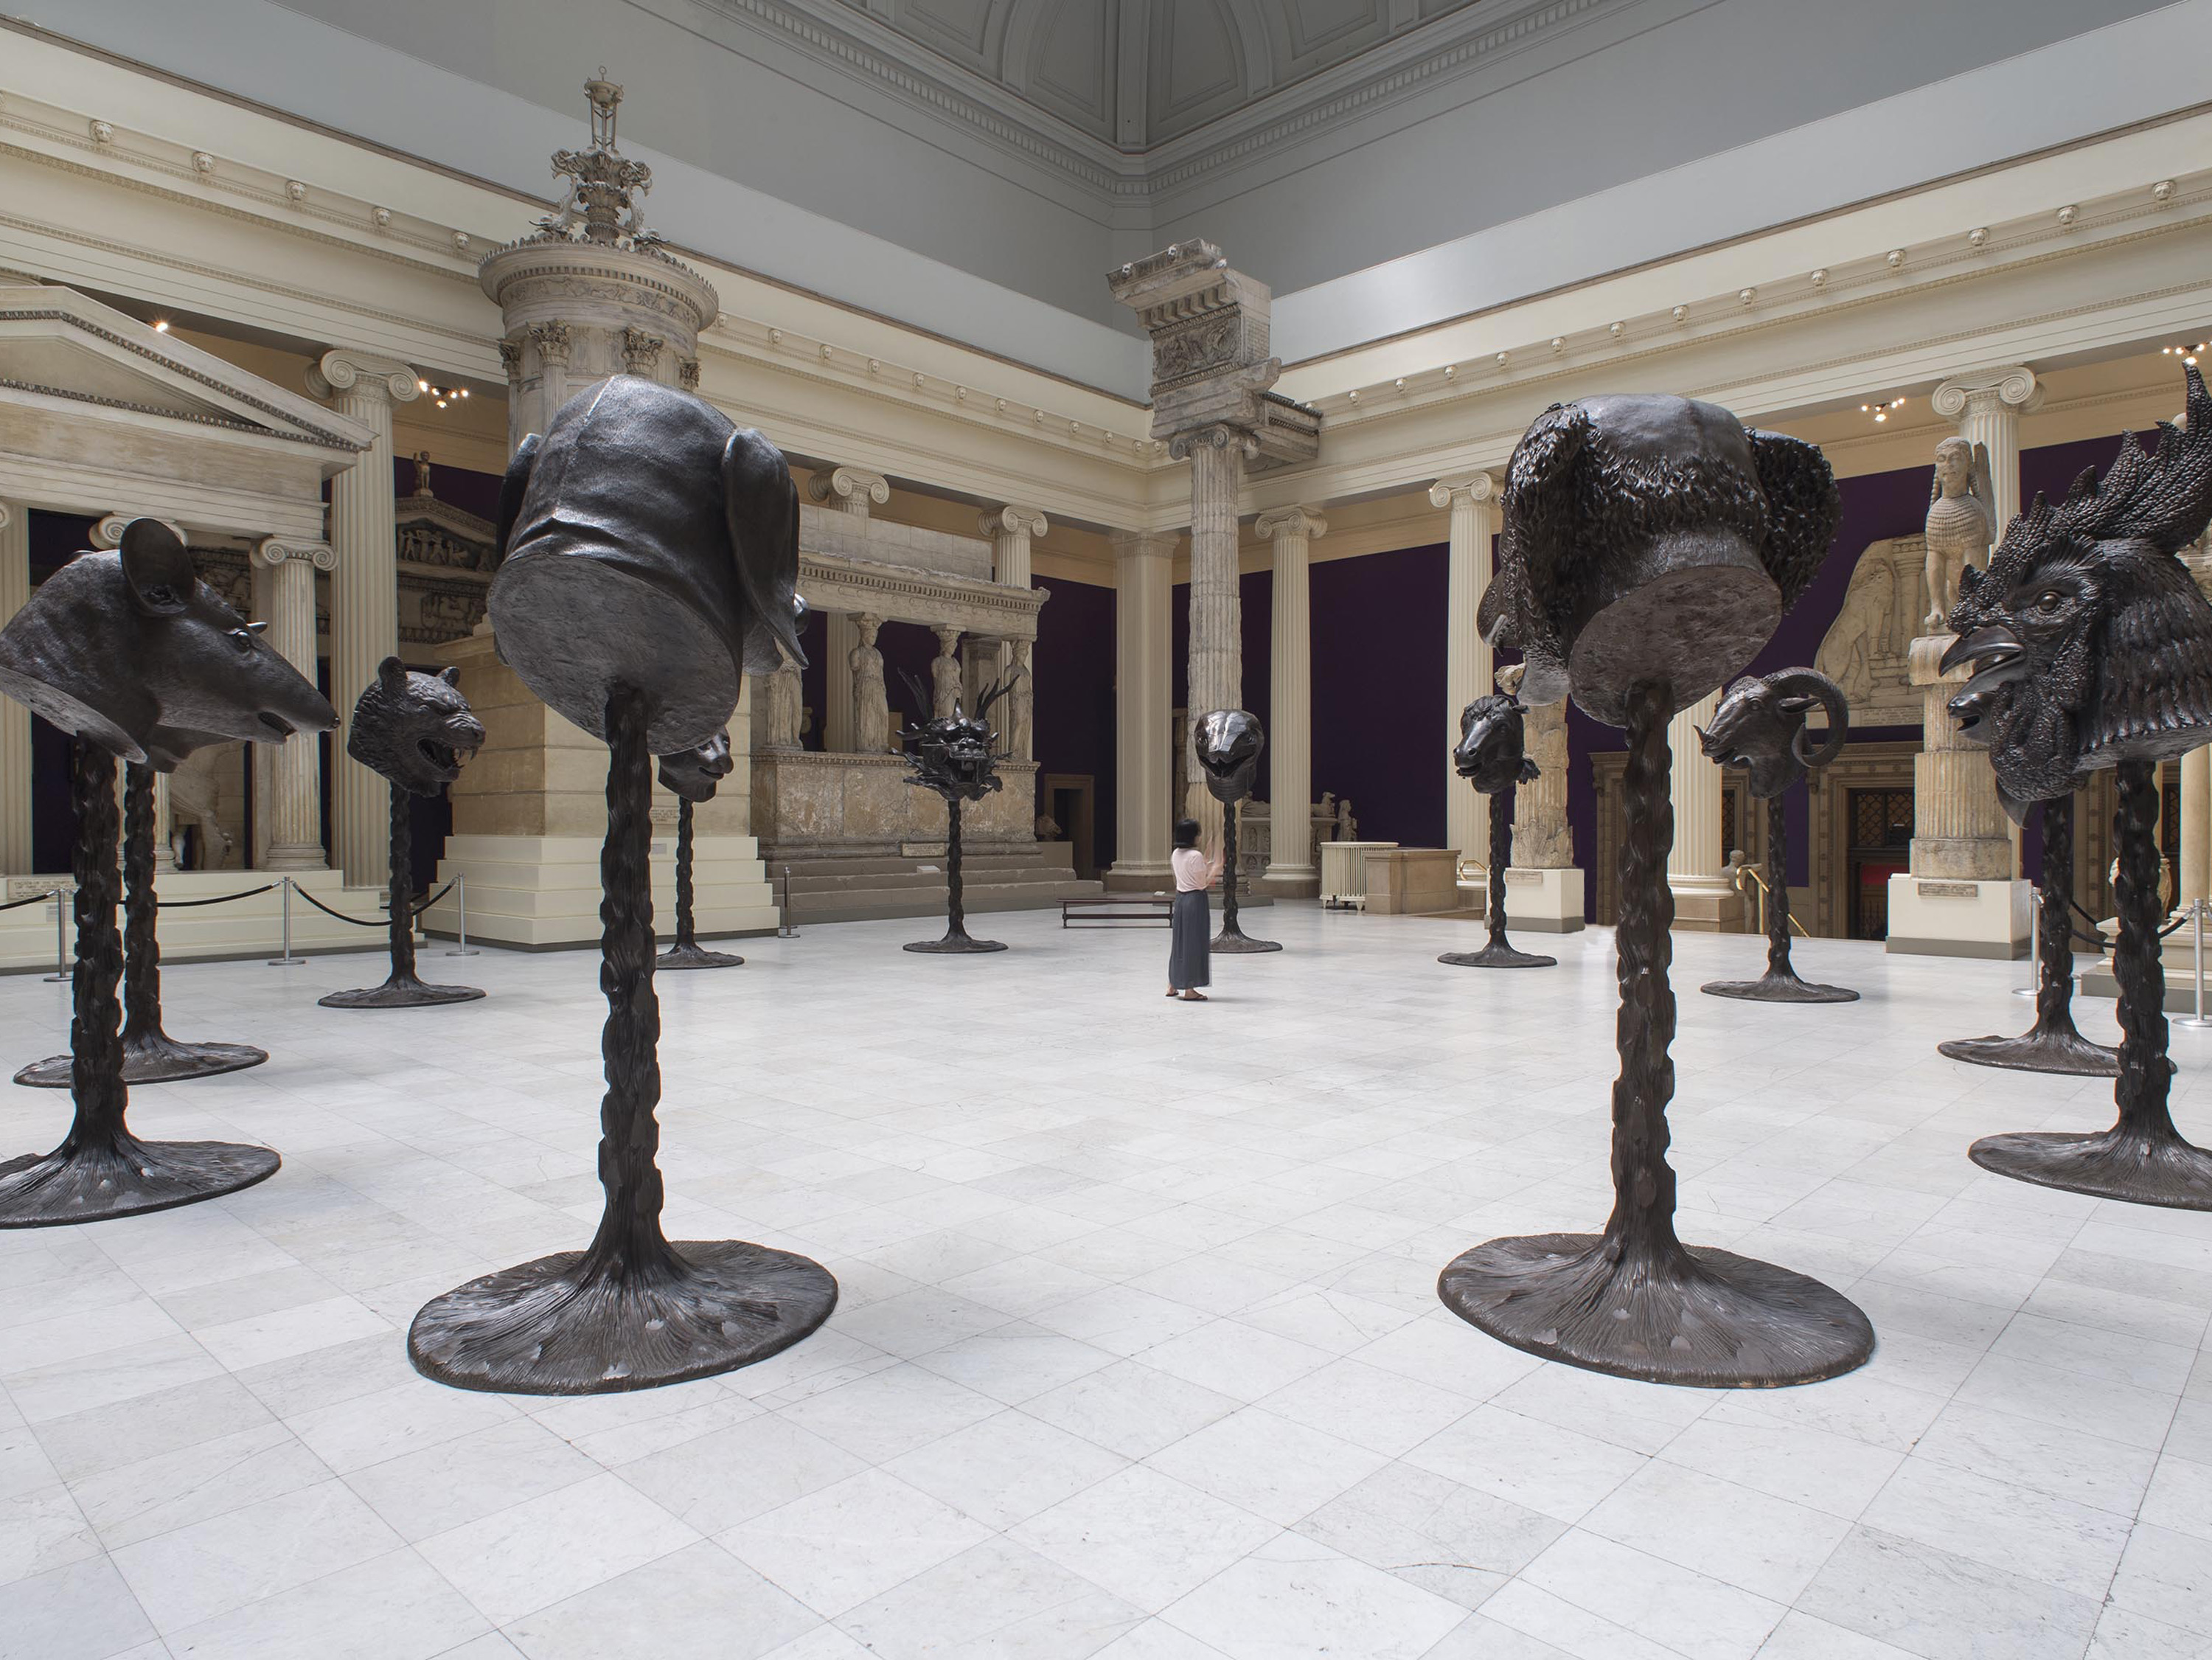 A large gallery room with five bronze animal head sculptures presented on tall, narrow bronze posts in front of an architectural cast of an ornate doorway with columns